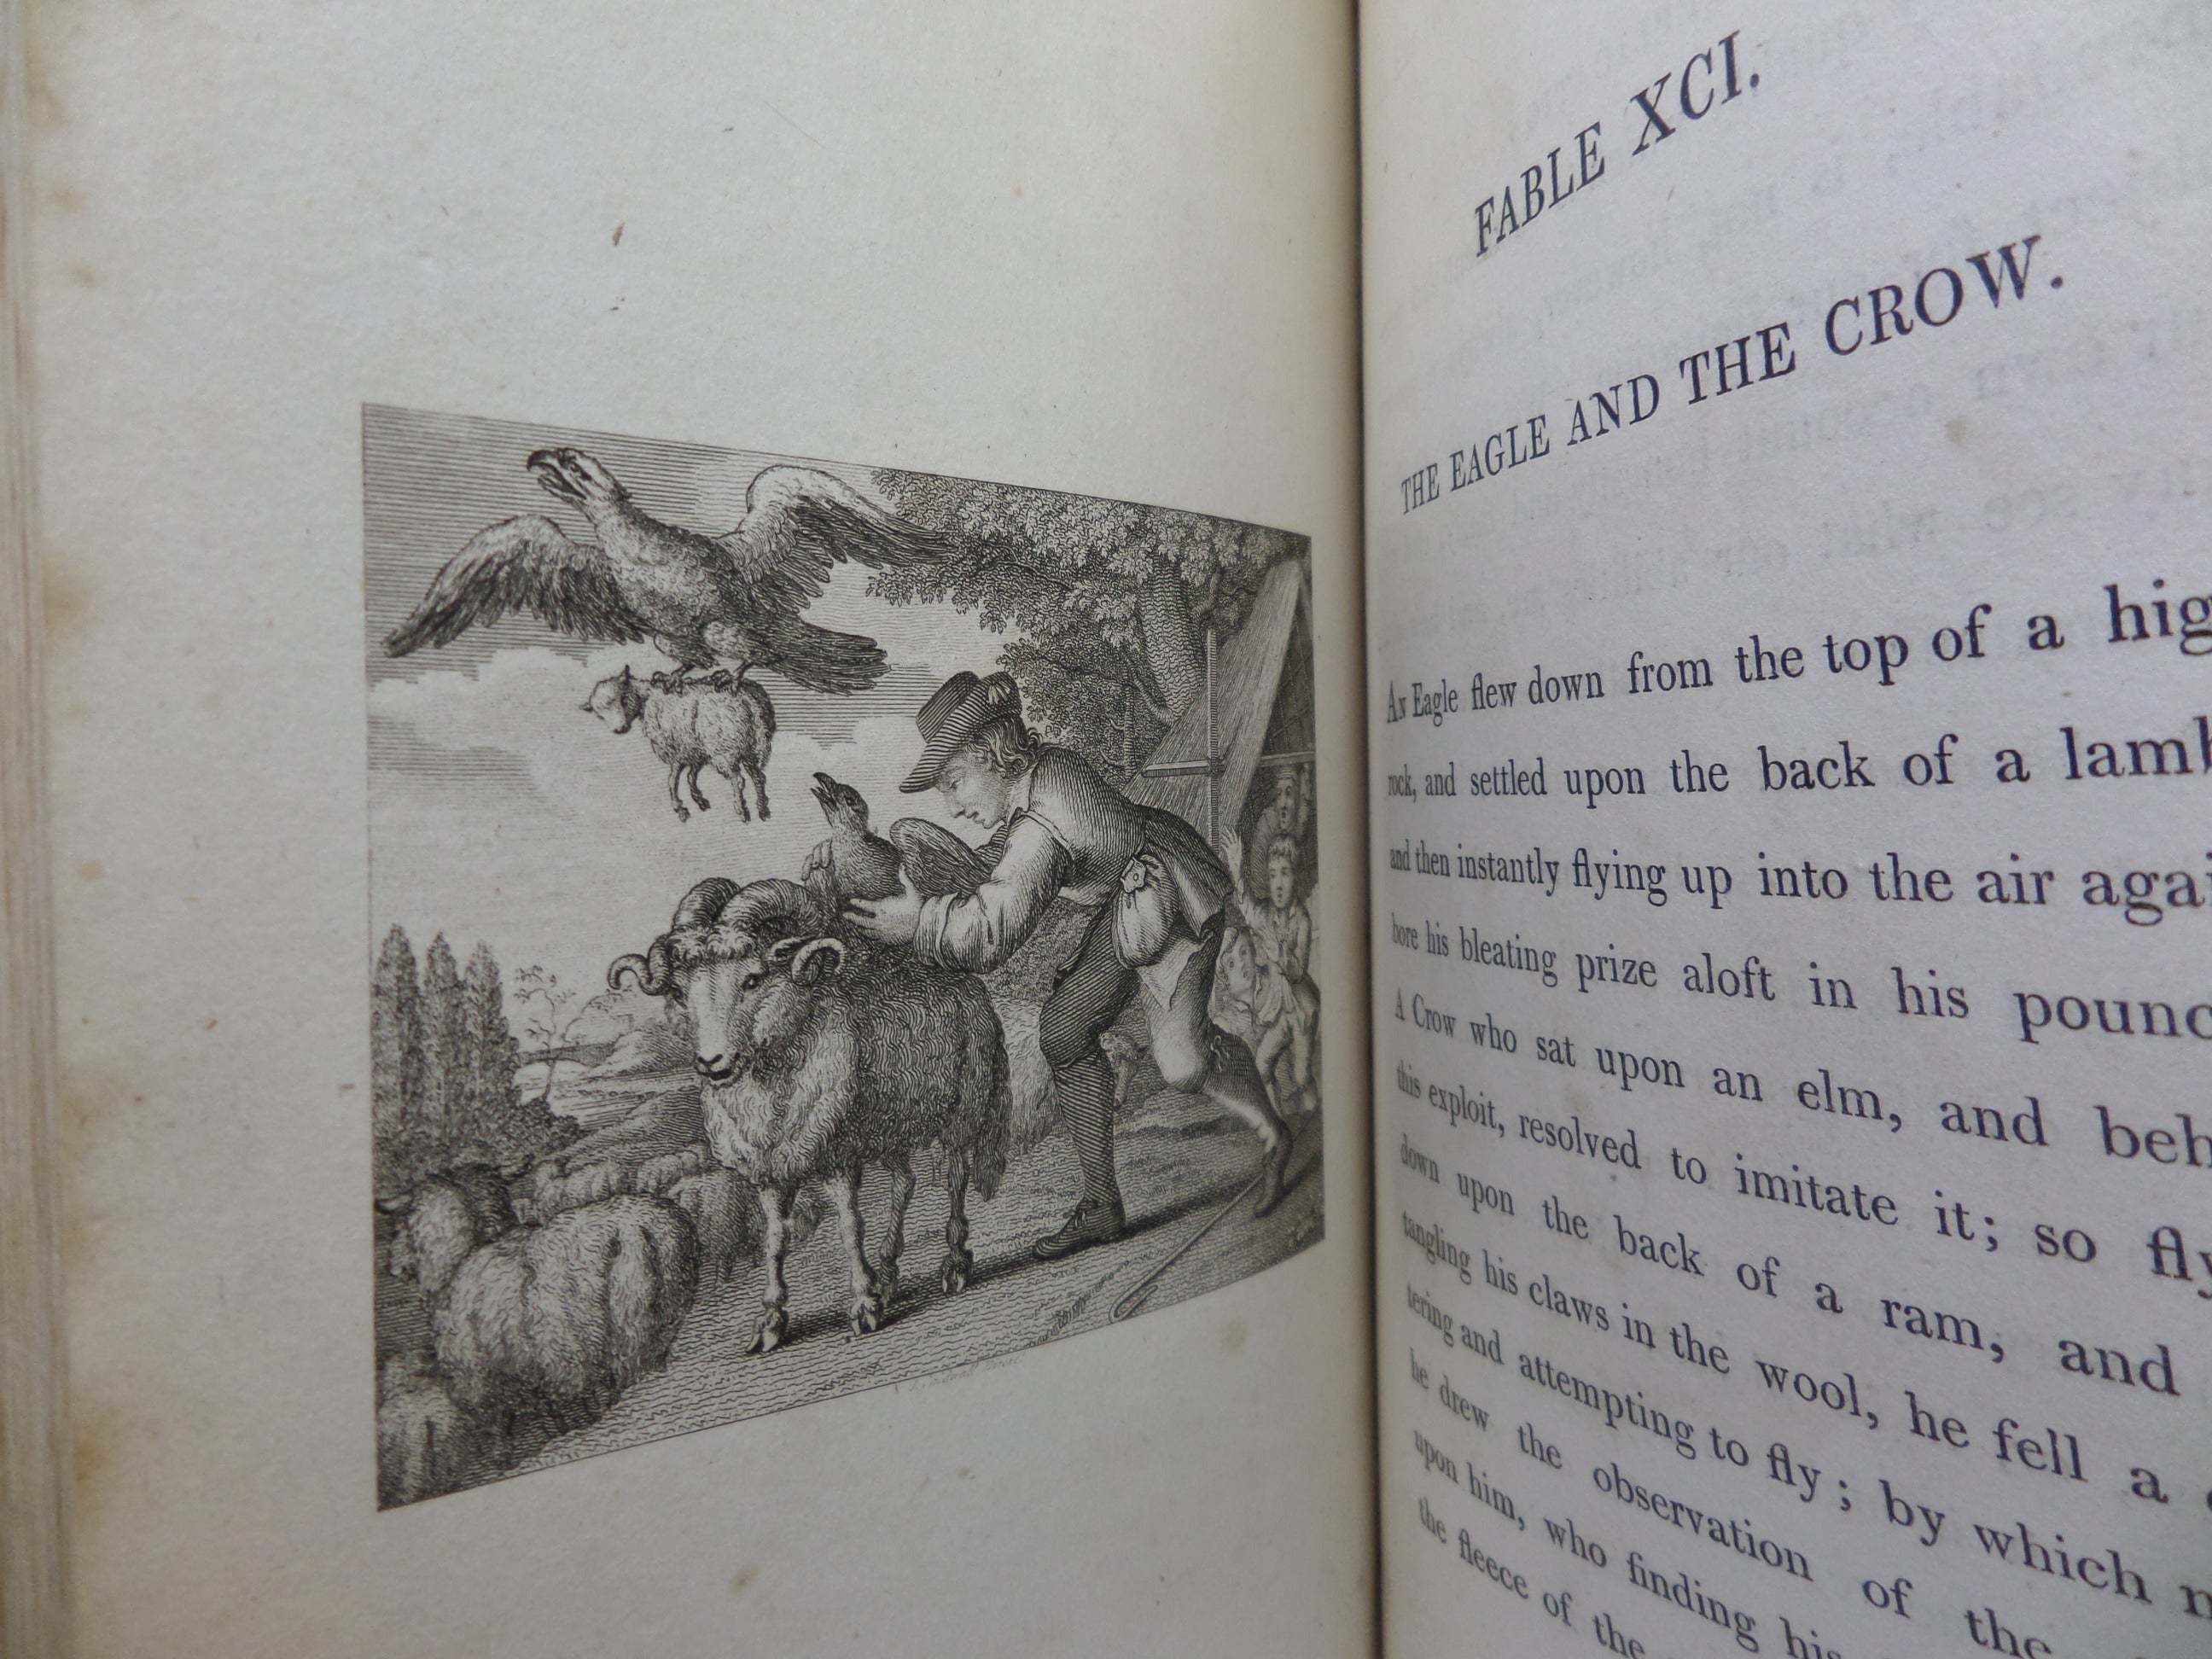 THE FABLES OF AESOP 1793 IN TWO VOLUMES, FINELY BOUND BY WILLIAM JACKSON